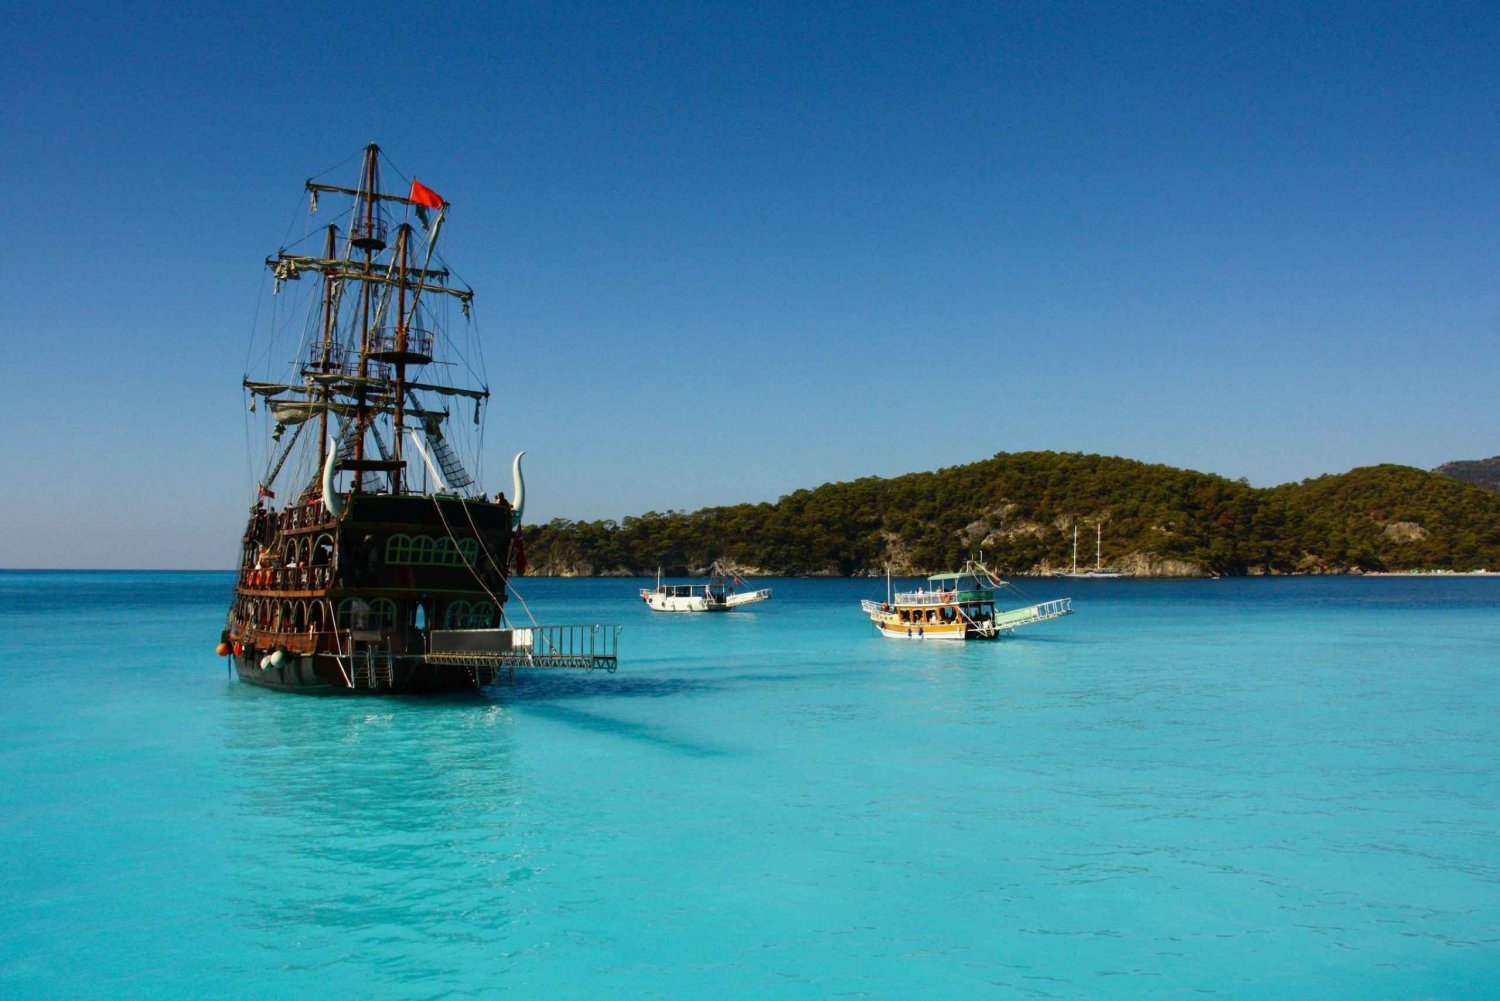 Ölüdeniz: Pirate Boat Cruise with Swim Stops and Lunch